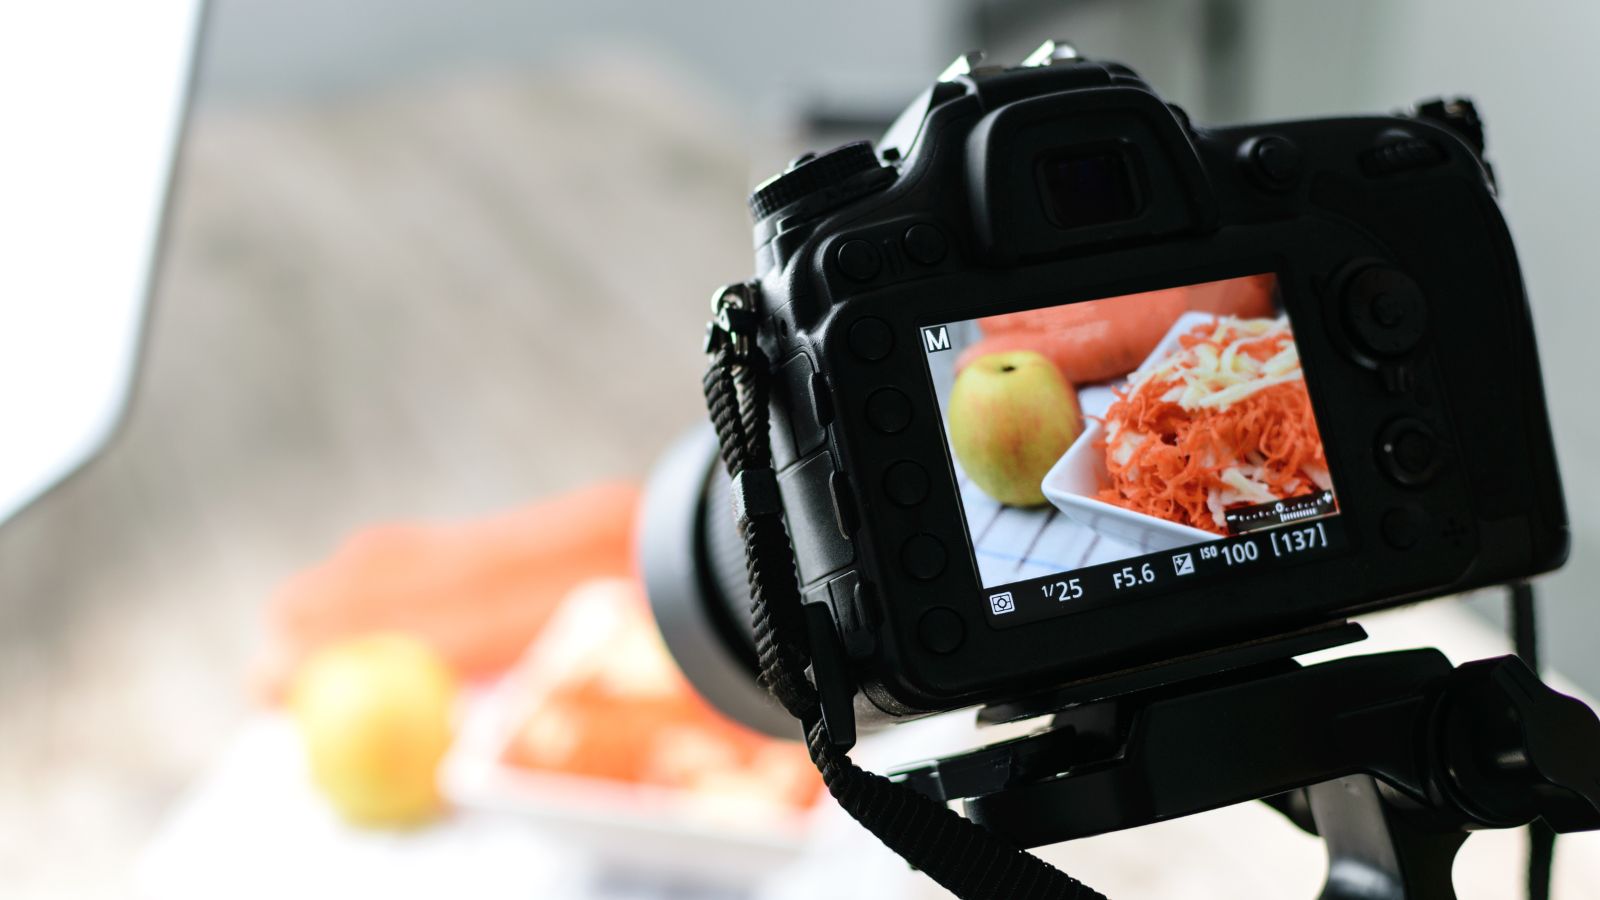 Capturing the Magic of Food in Video Production